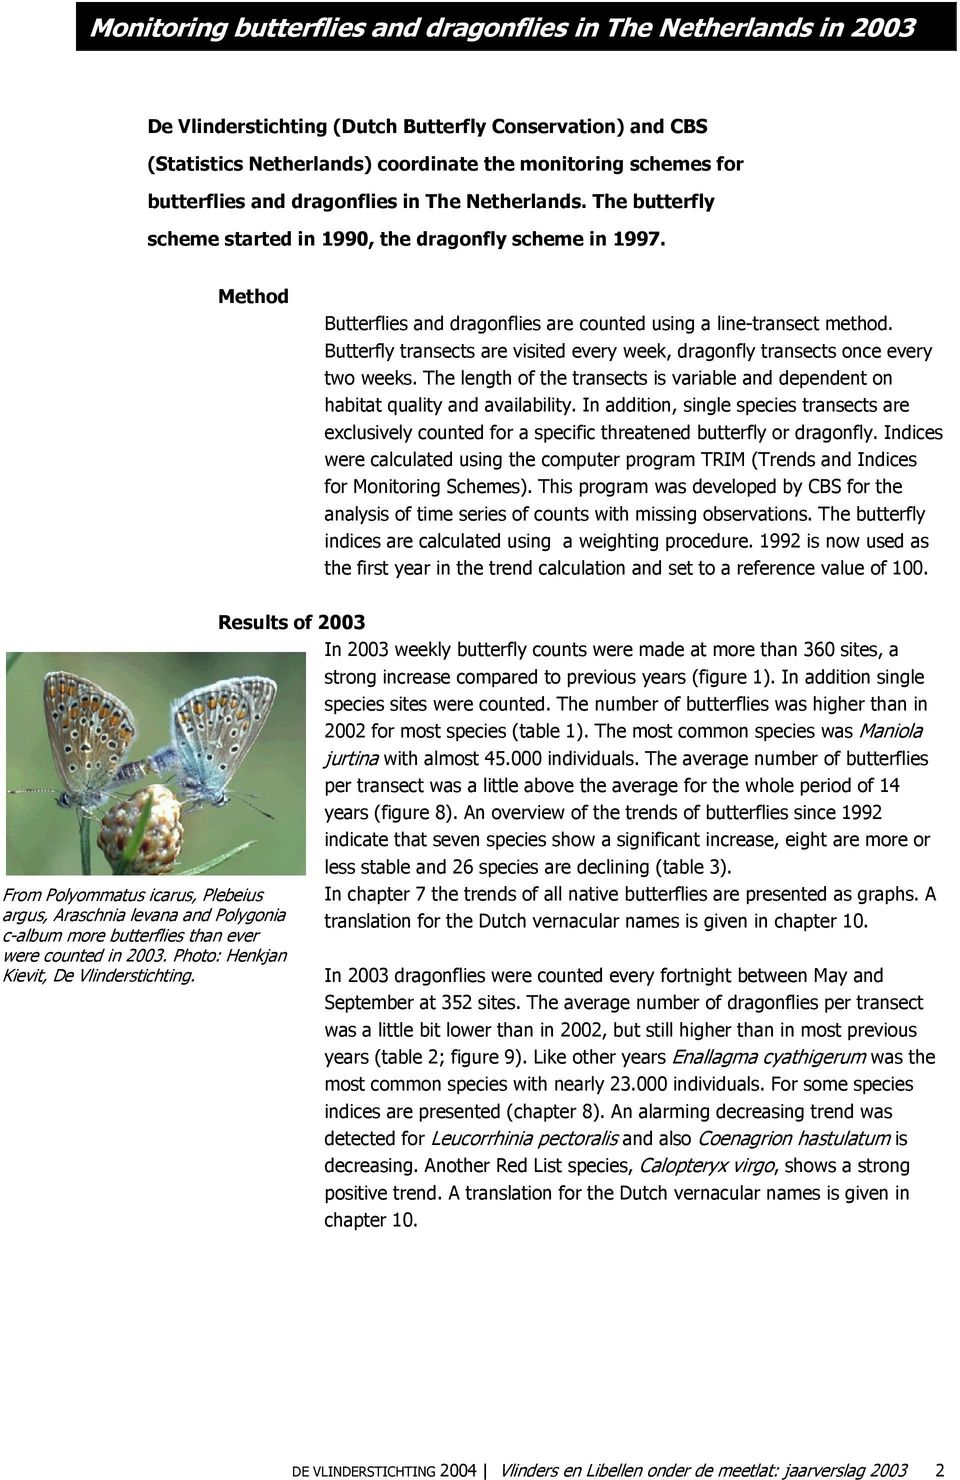 Butterfly transects are visited every week, dragonfly transects once every two weeks. The length of the transects is variable and dependent on habitat quality and availability.